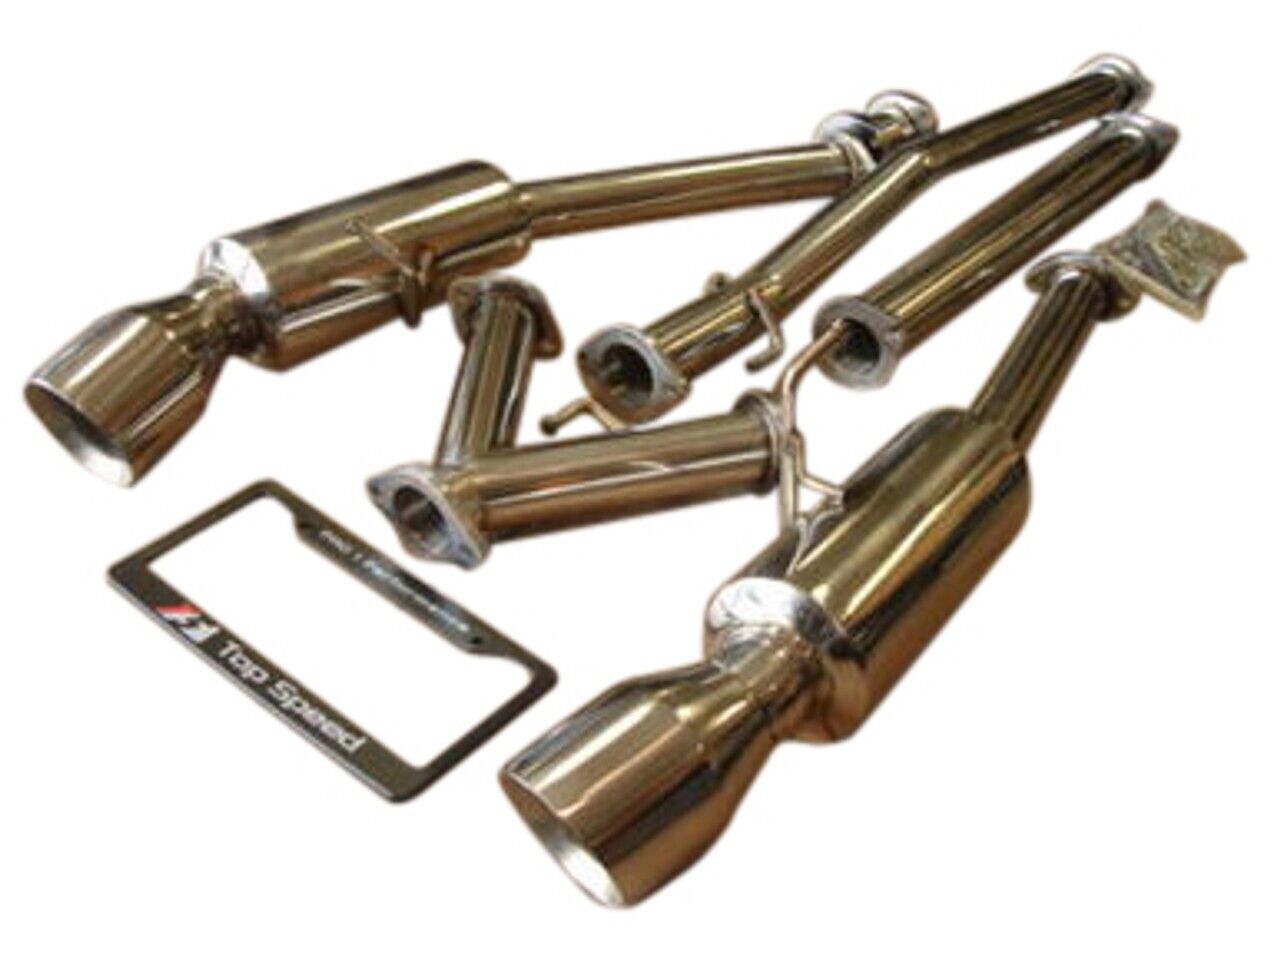 Fits Nissan Altima Coupe 2.5L & 3.5L 08-13 Top Speed Pro-1 Dual Exhaust System